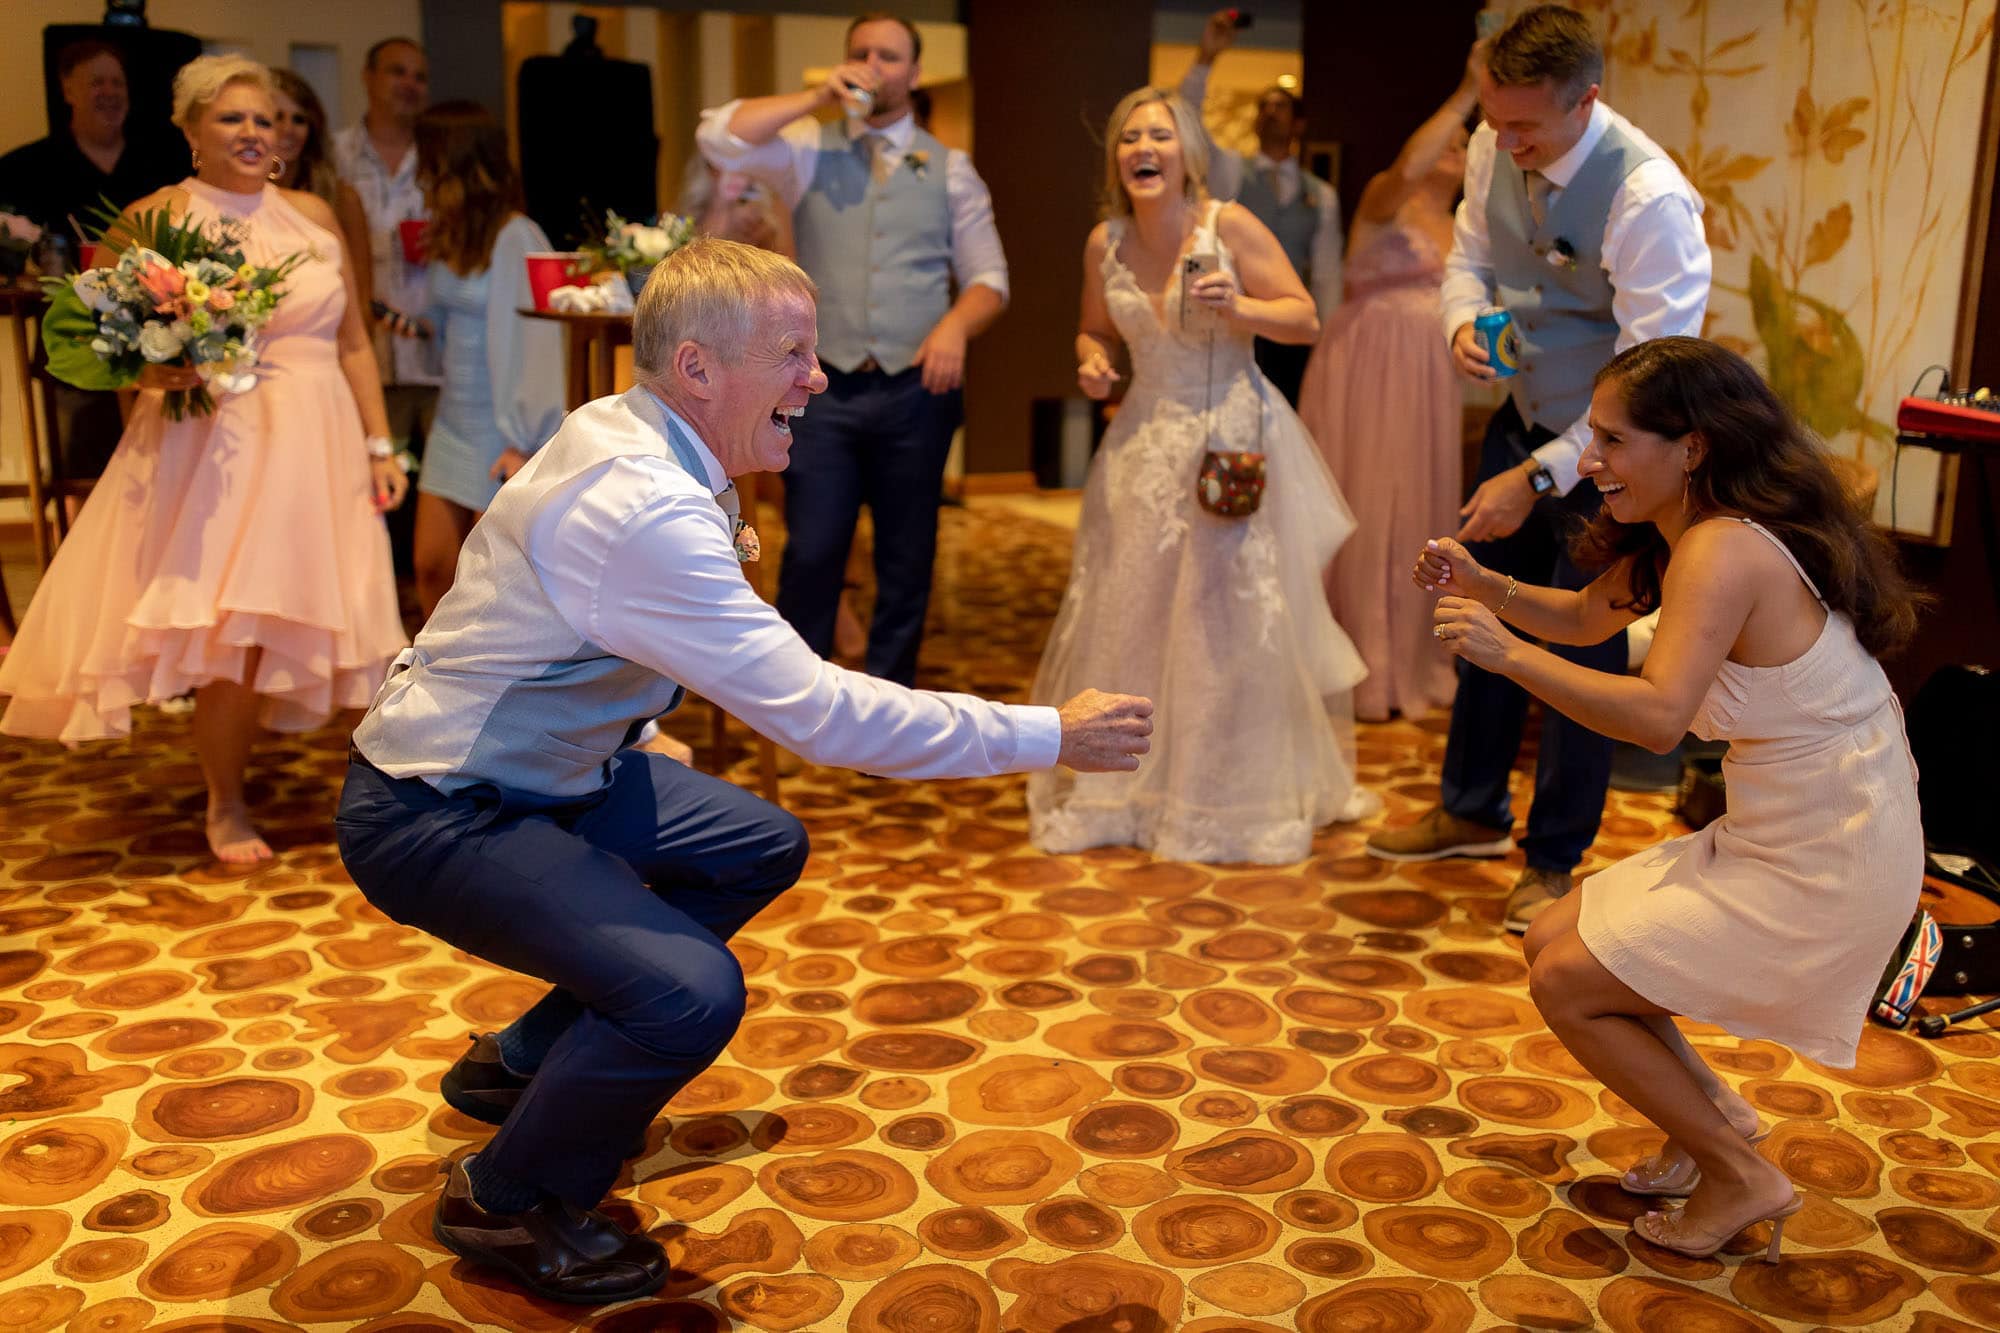 Dancing and fun during a Costa Rica wedding experience to remember!